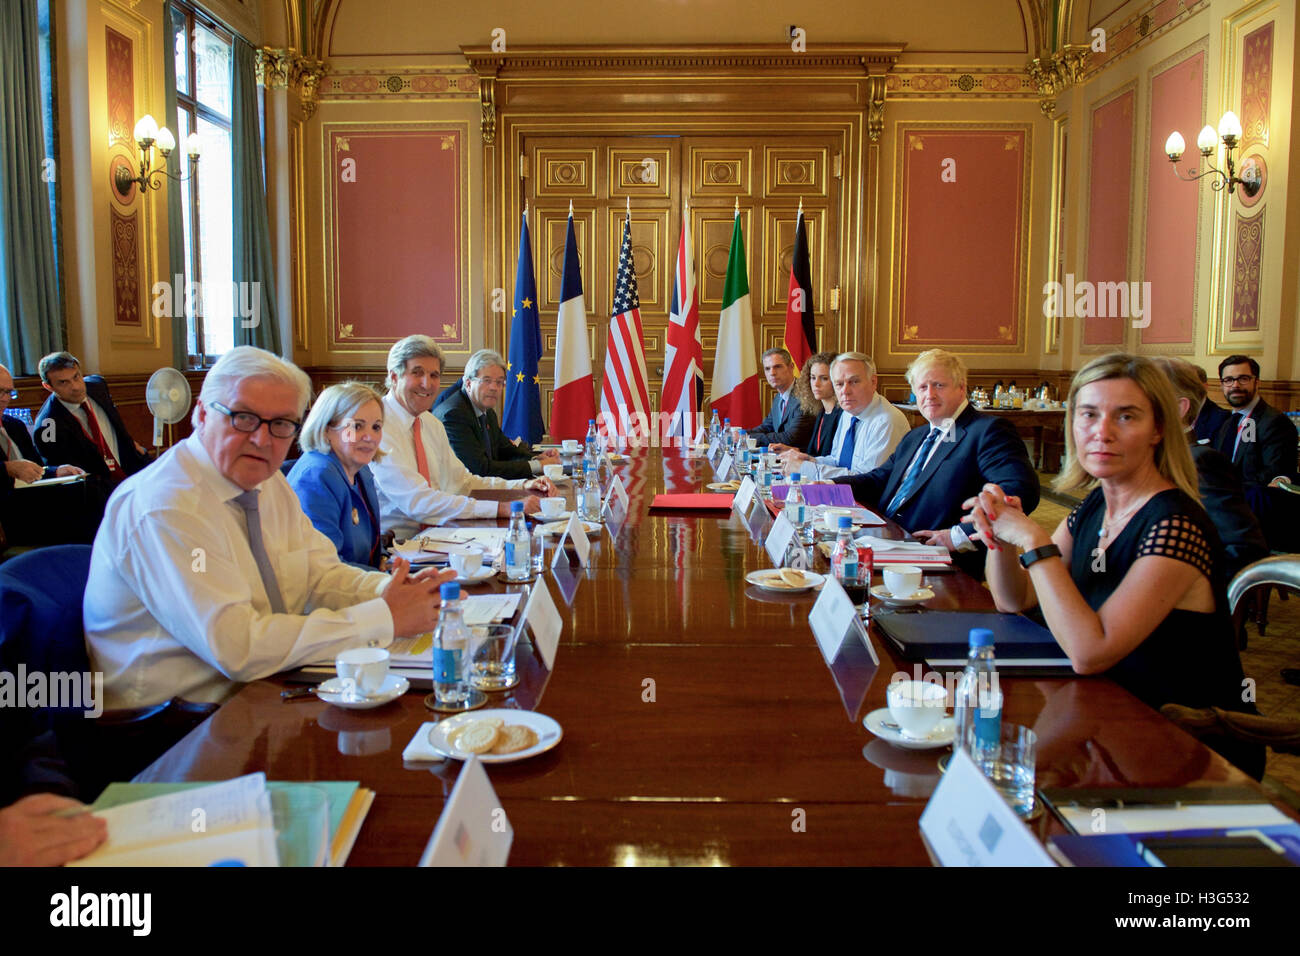 U.S. Secretary of State John Kerry and several colleagues – German Foreign Minister Frank-Walter Steinmeier, Italian Foreign Minister Paolo Gentiloni, French Foreign Minister Jean-Marc Ayrault, and European Union High Representative for Foreign Affairs Federica Mogherini – sit with newly installed British Foreign Secretary Boris Johnson on July 19, 2016, in the Grand Locarno Room at the Foreign &amp; Commonwealth Office in London, U.K., before a group conversation about Syria. Stock Photo